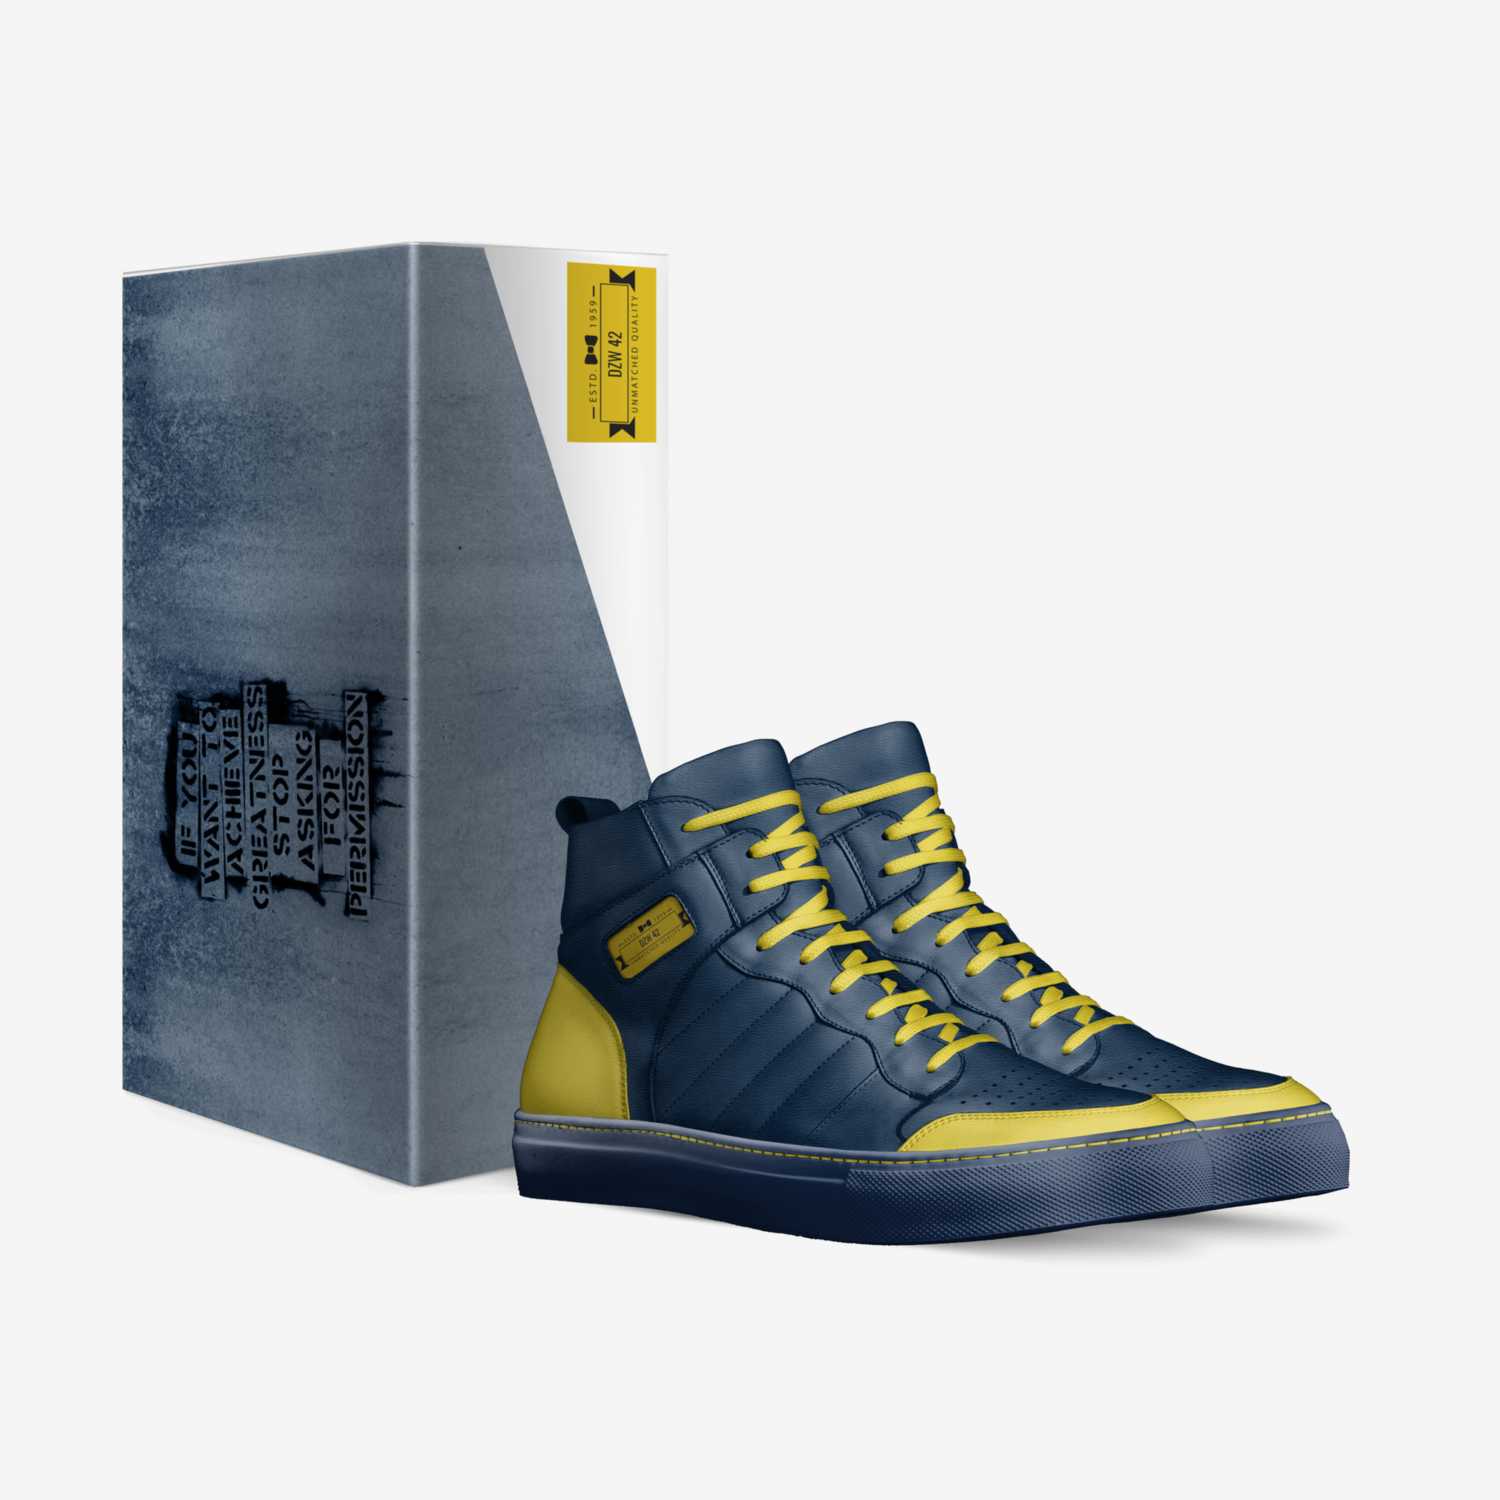 DZW 42 custom made in Italy shoes by Devin White | Box view